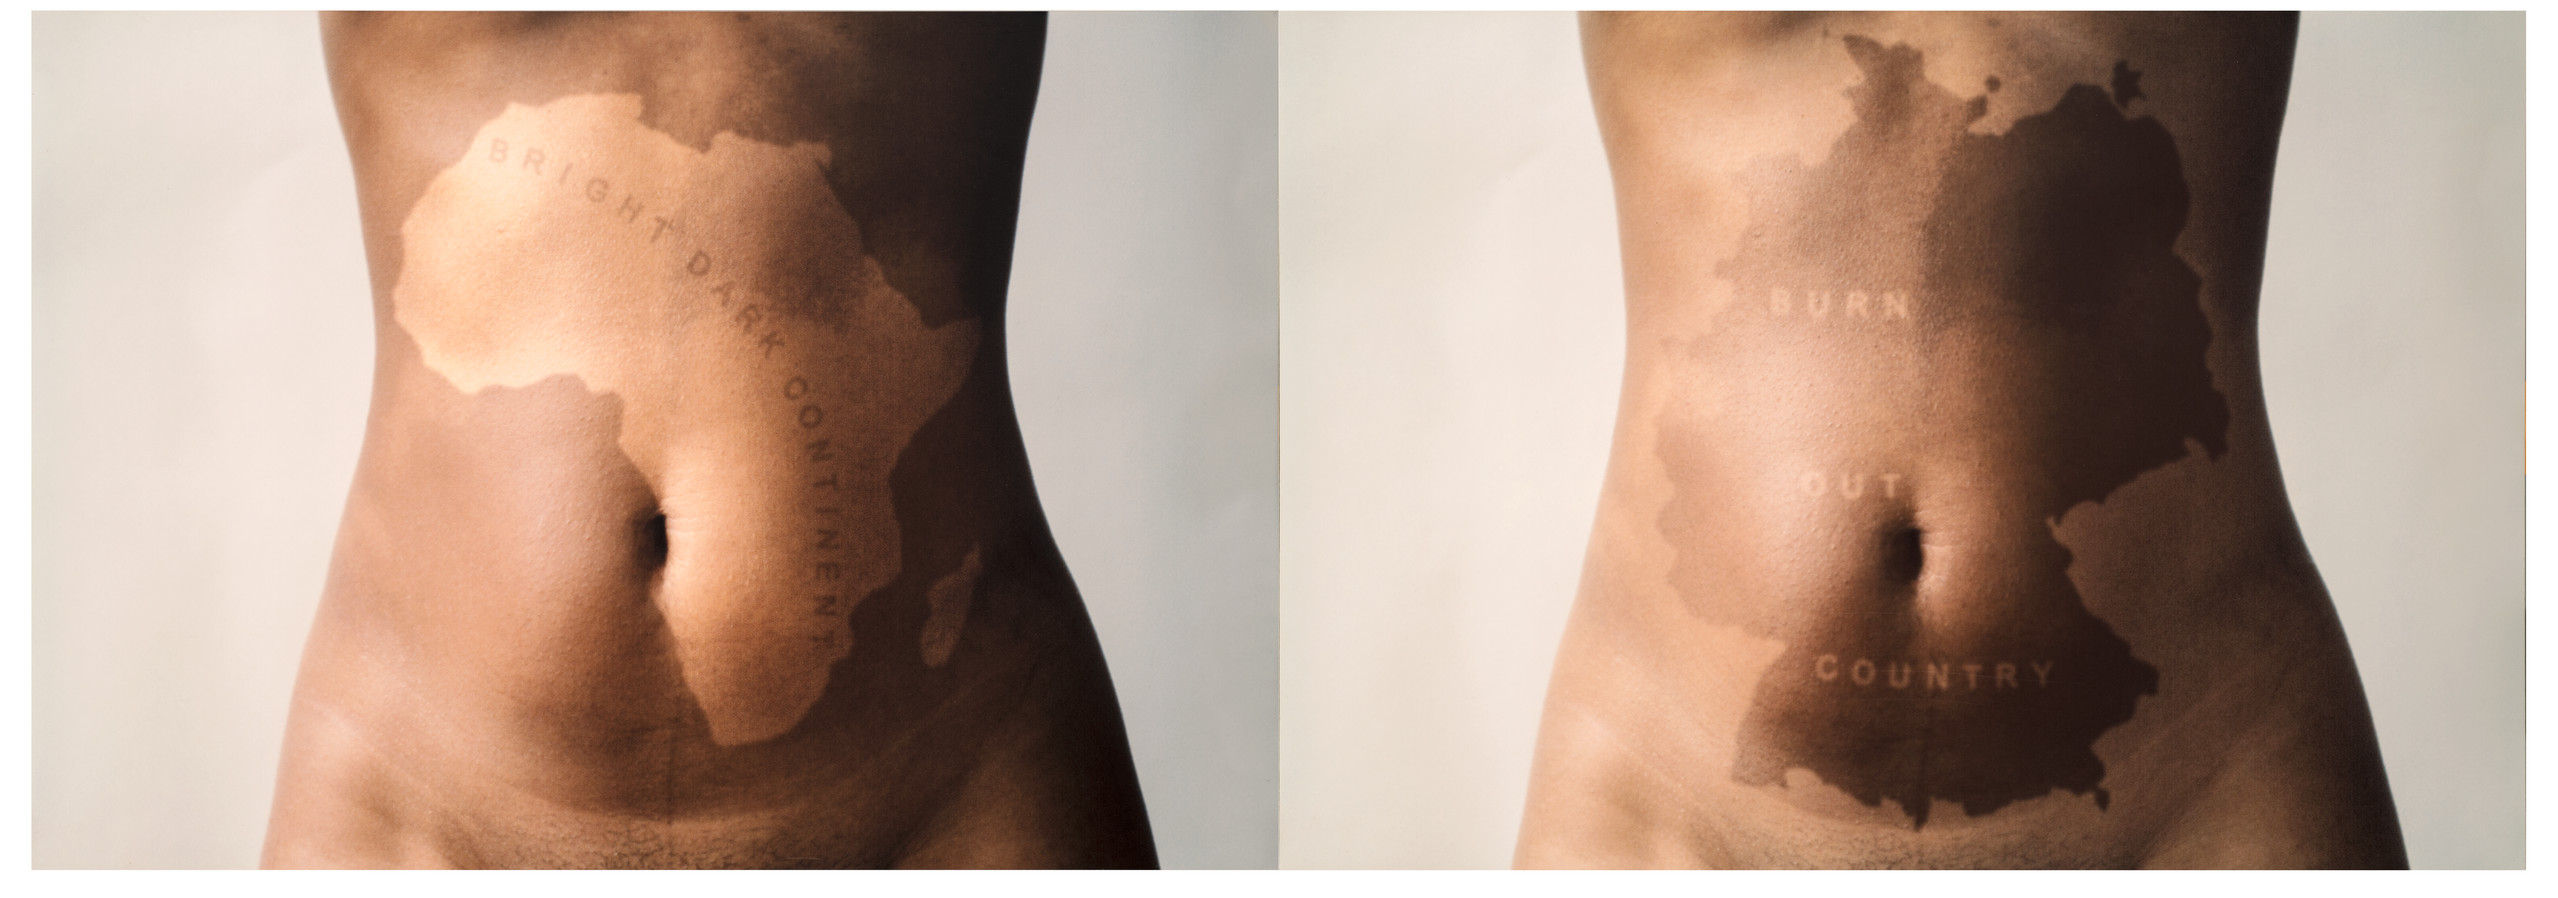 There are two nude torsos side by side. On the left, the torso has a lighter patch of skin that outlines Africa and reads 'Bright Dark Continent.' On the right, the torso has a darker patch of skin that outlines Germany and in light letters reads 'Burn Out Country.'